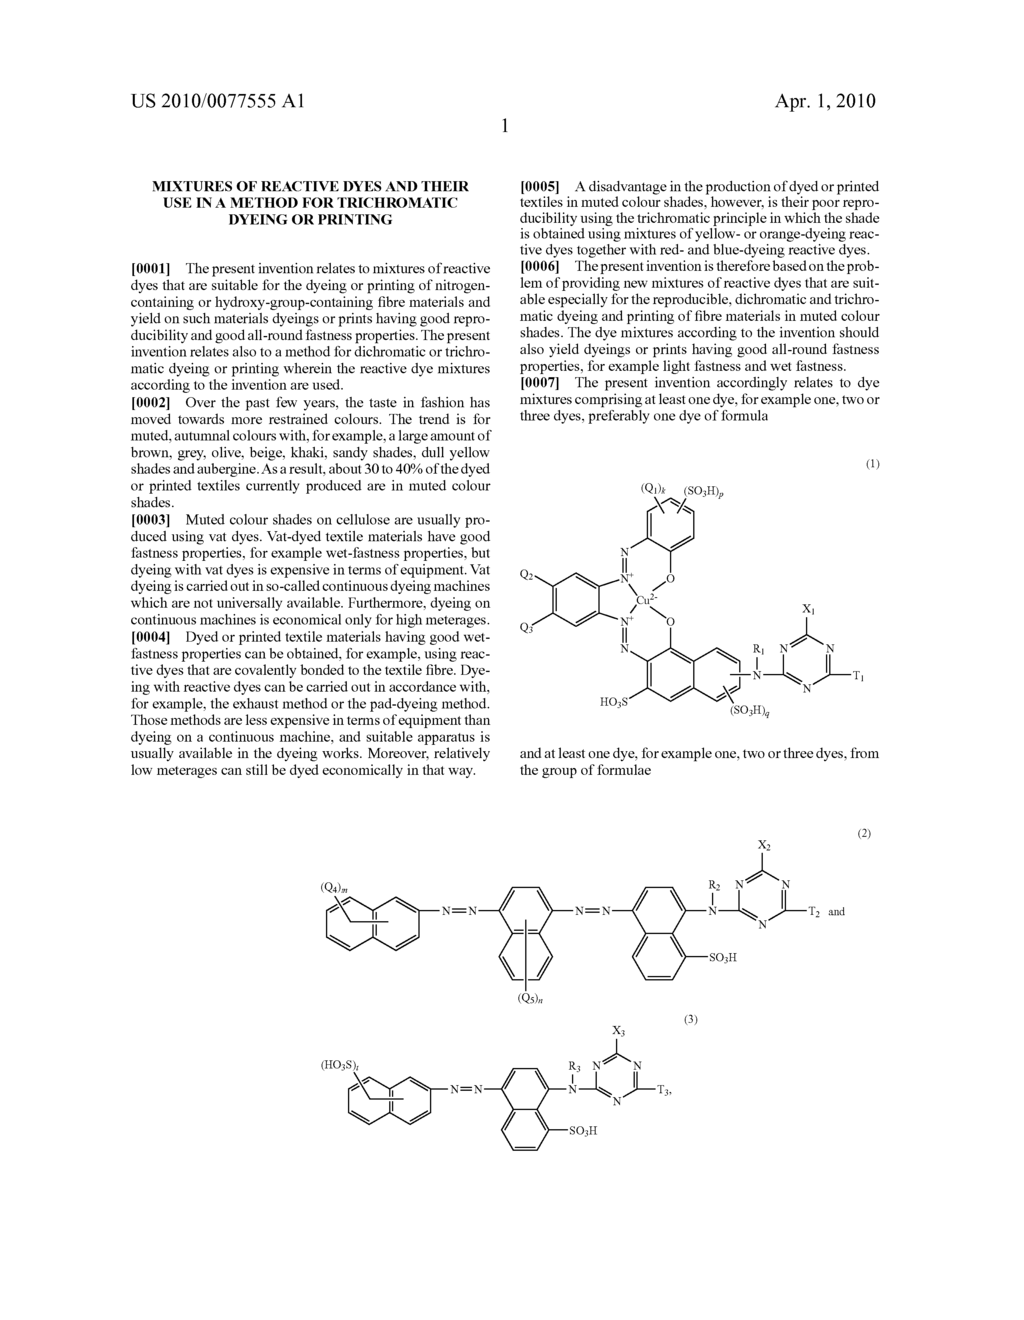 MIXTURES OF REACTIVE DYES AND THEIR USE IN A METHOD FOR TRICHROMATIC DYEING OR PRINTING - diagram, schematic, and image 03